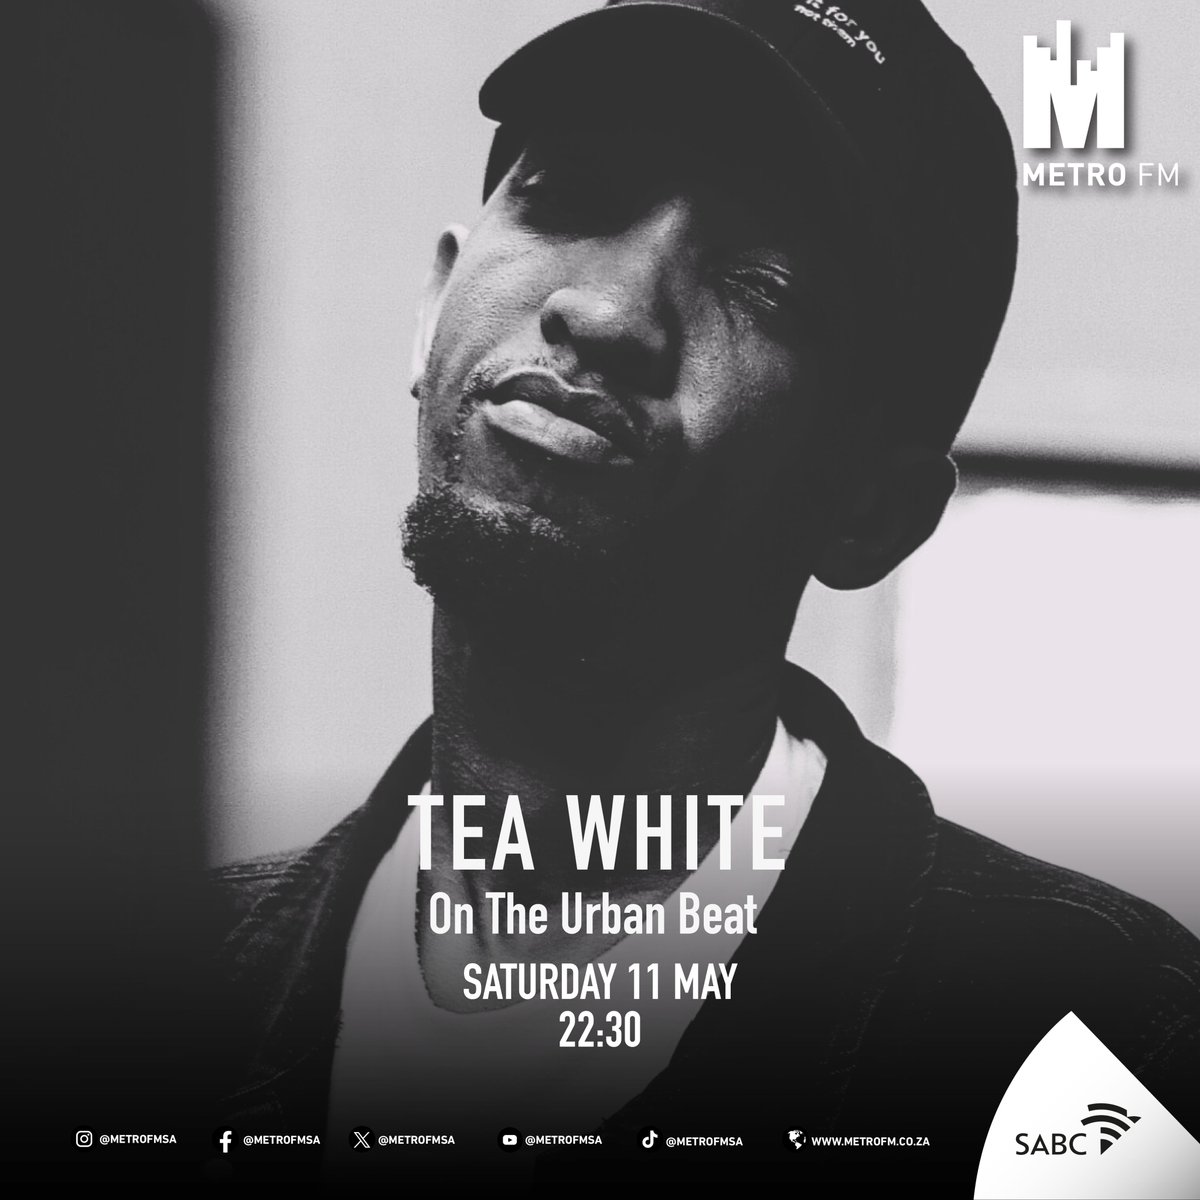 DJ/Producer @teawhite_10 joins us in studio tonight as we chat all things music followed by a live mix